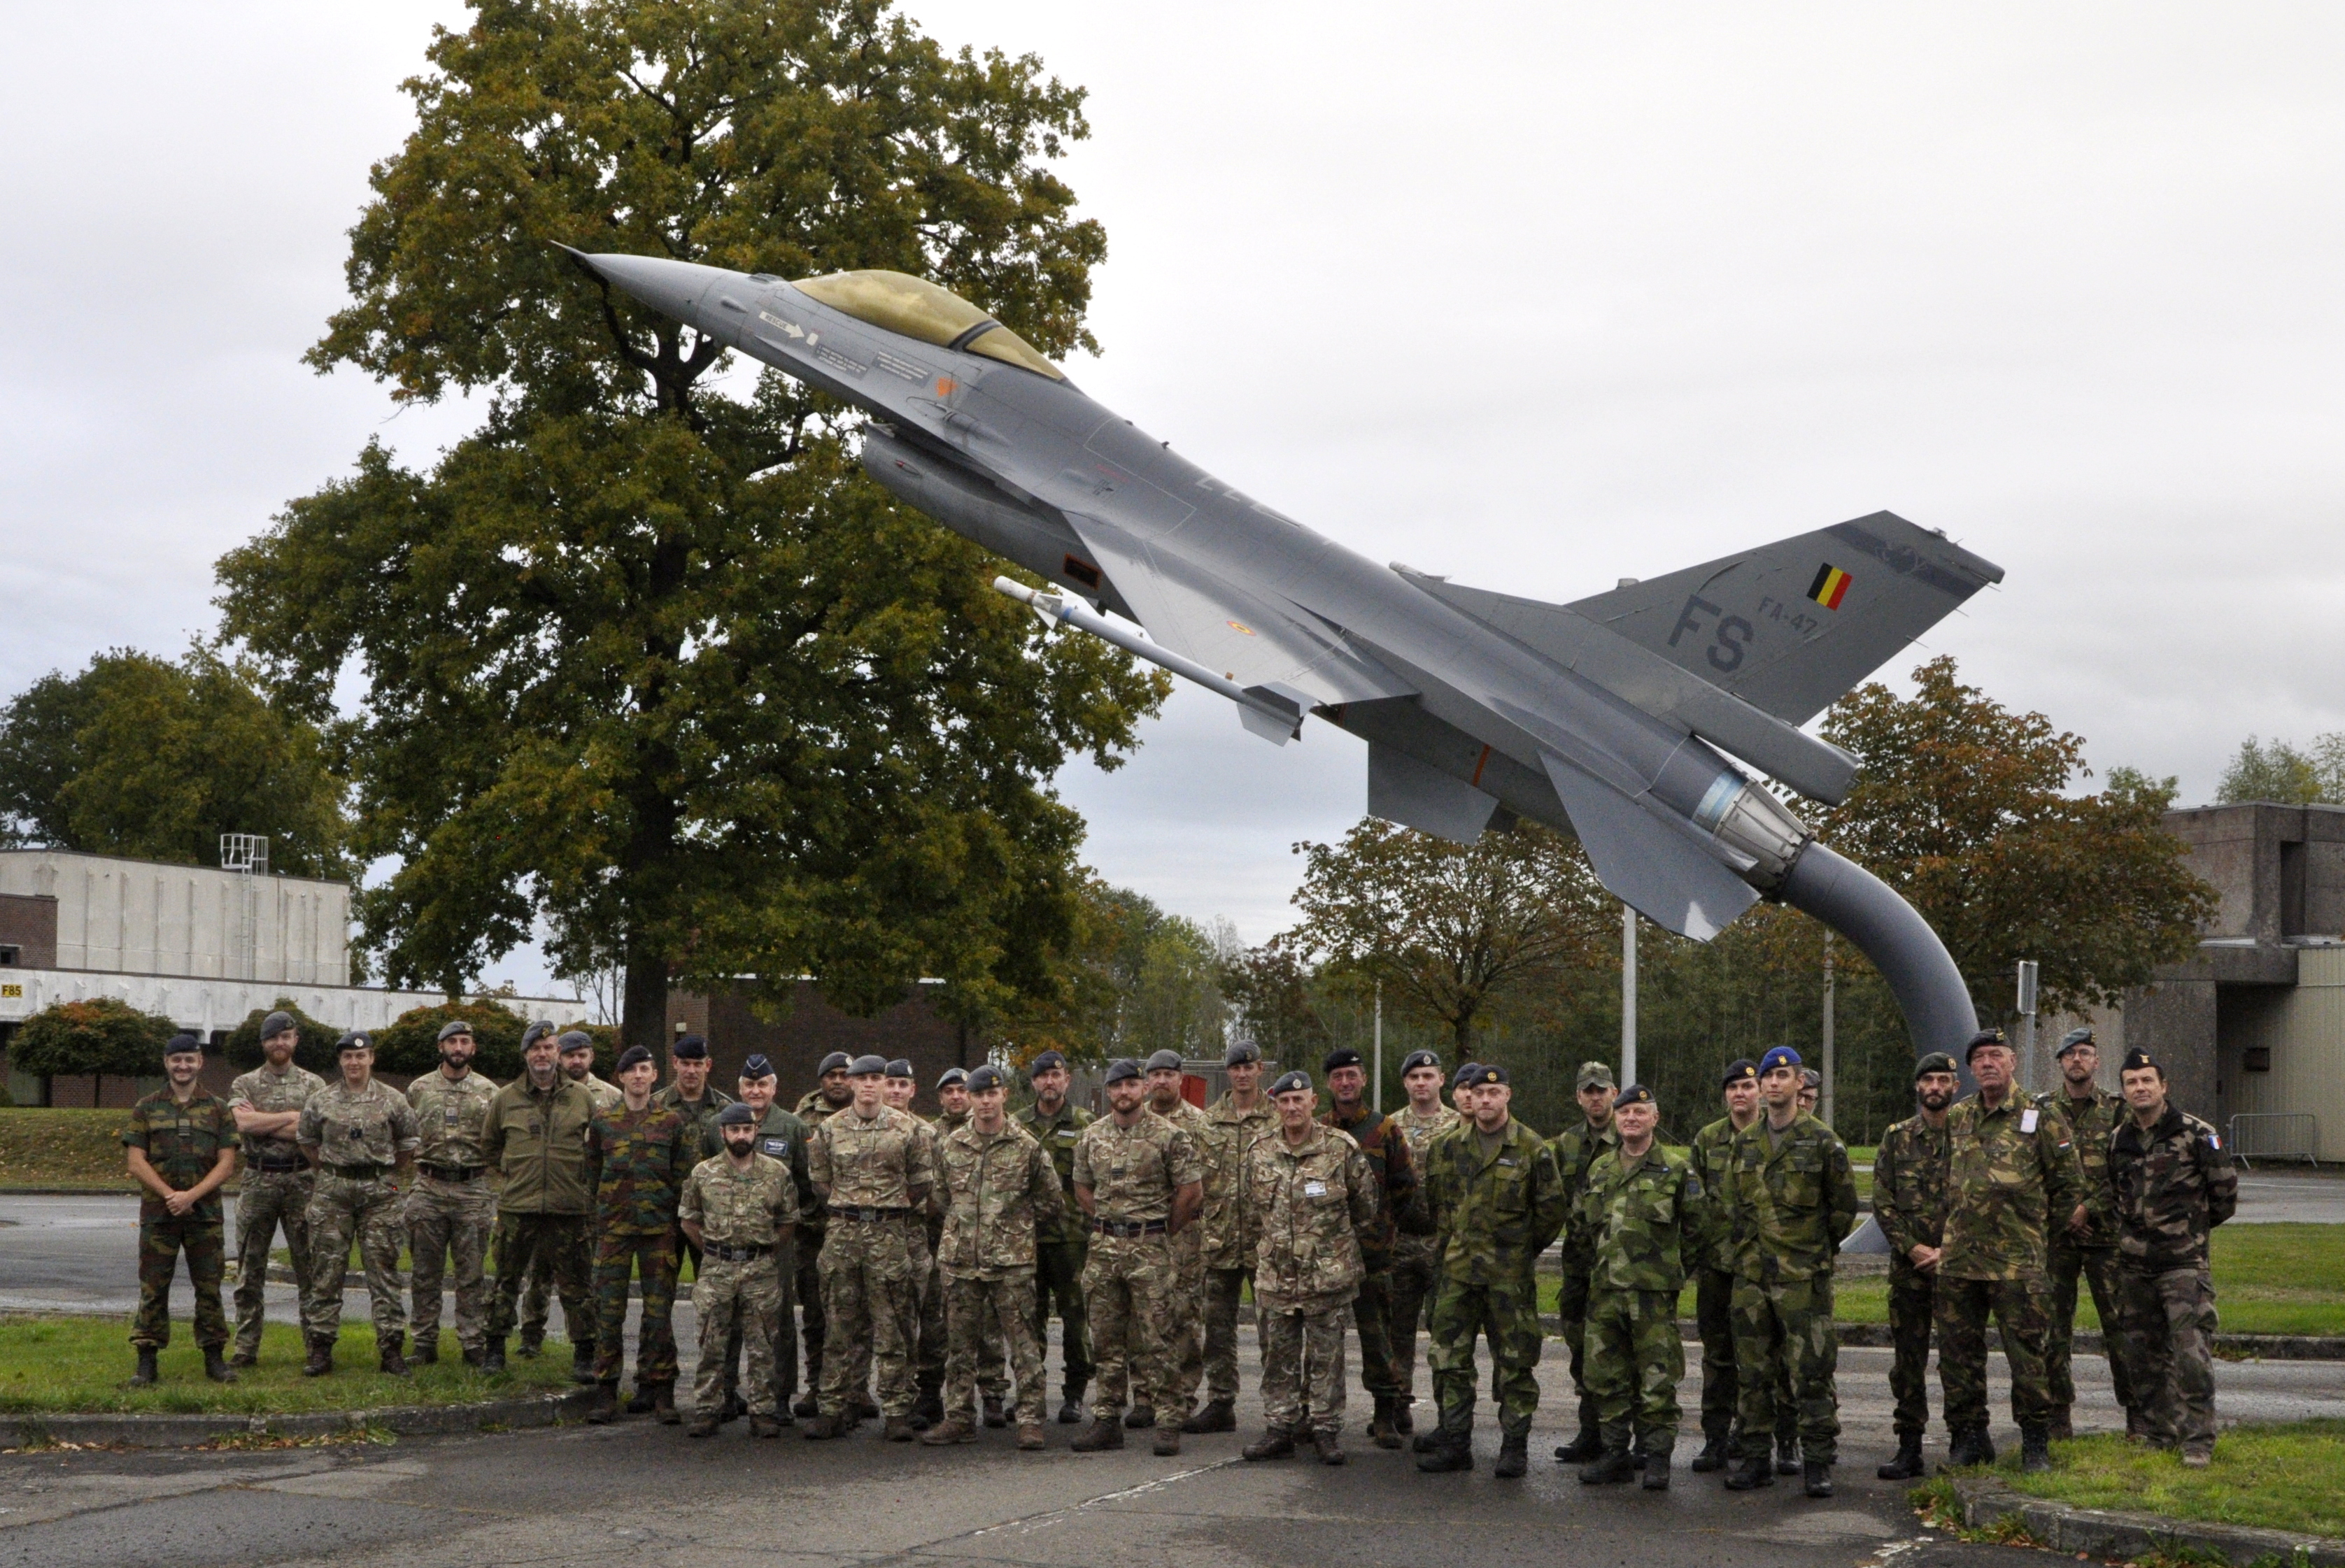 Image shows RAF Squadron outside by model of Typhoon aircraft.